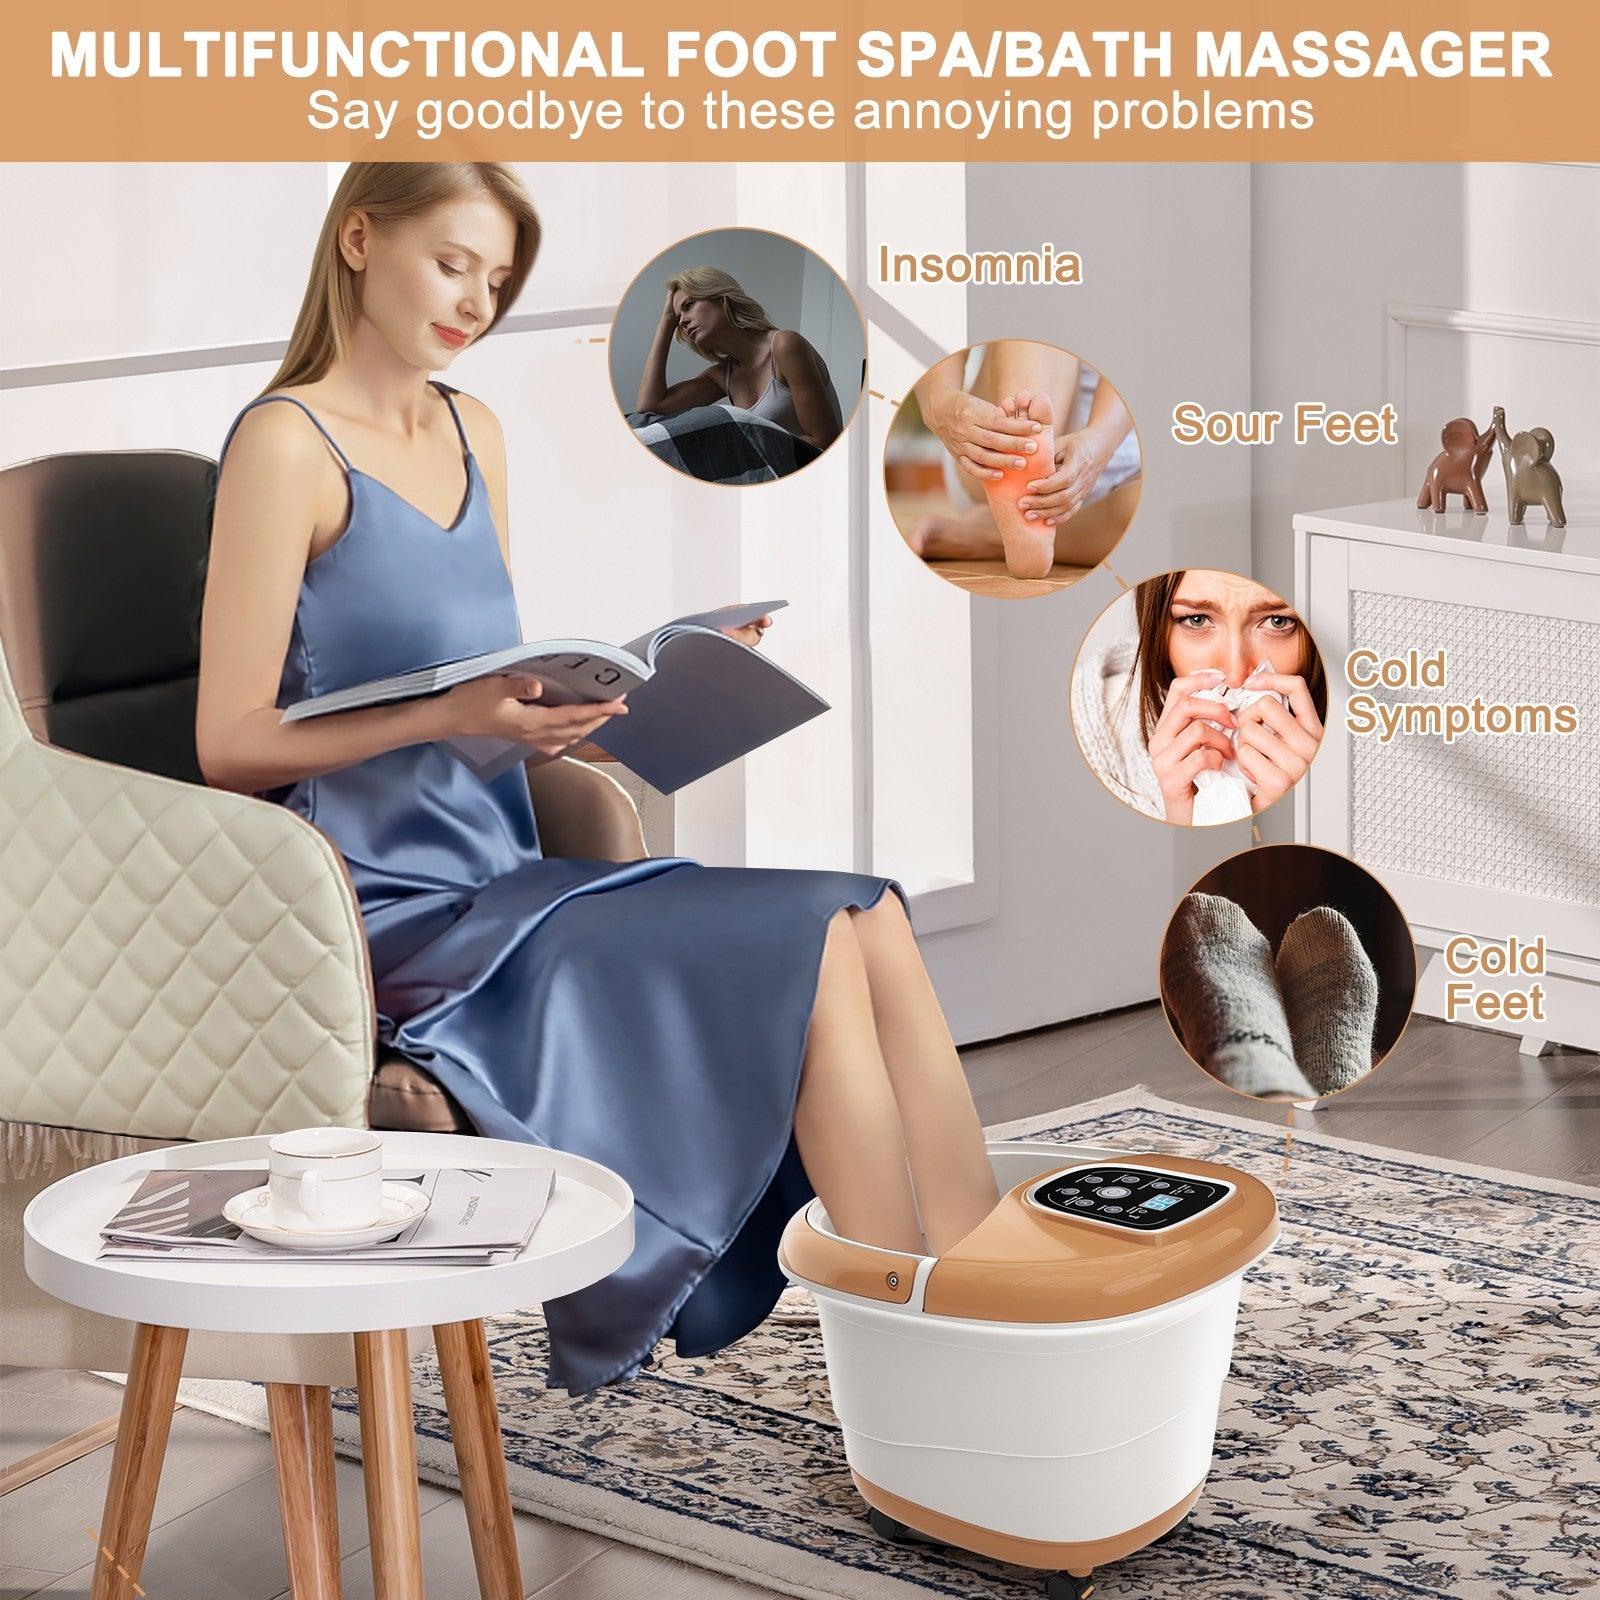 All-in-One Heat Bubble Vibration Foot Spa Massager with 6 Massage Rollers 13850496 - YOURISHOP.COM